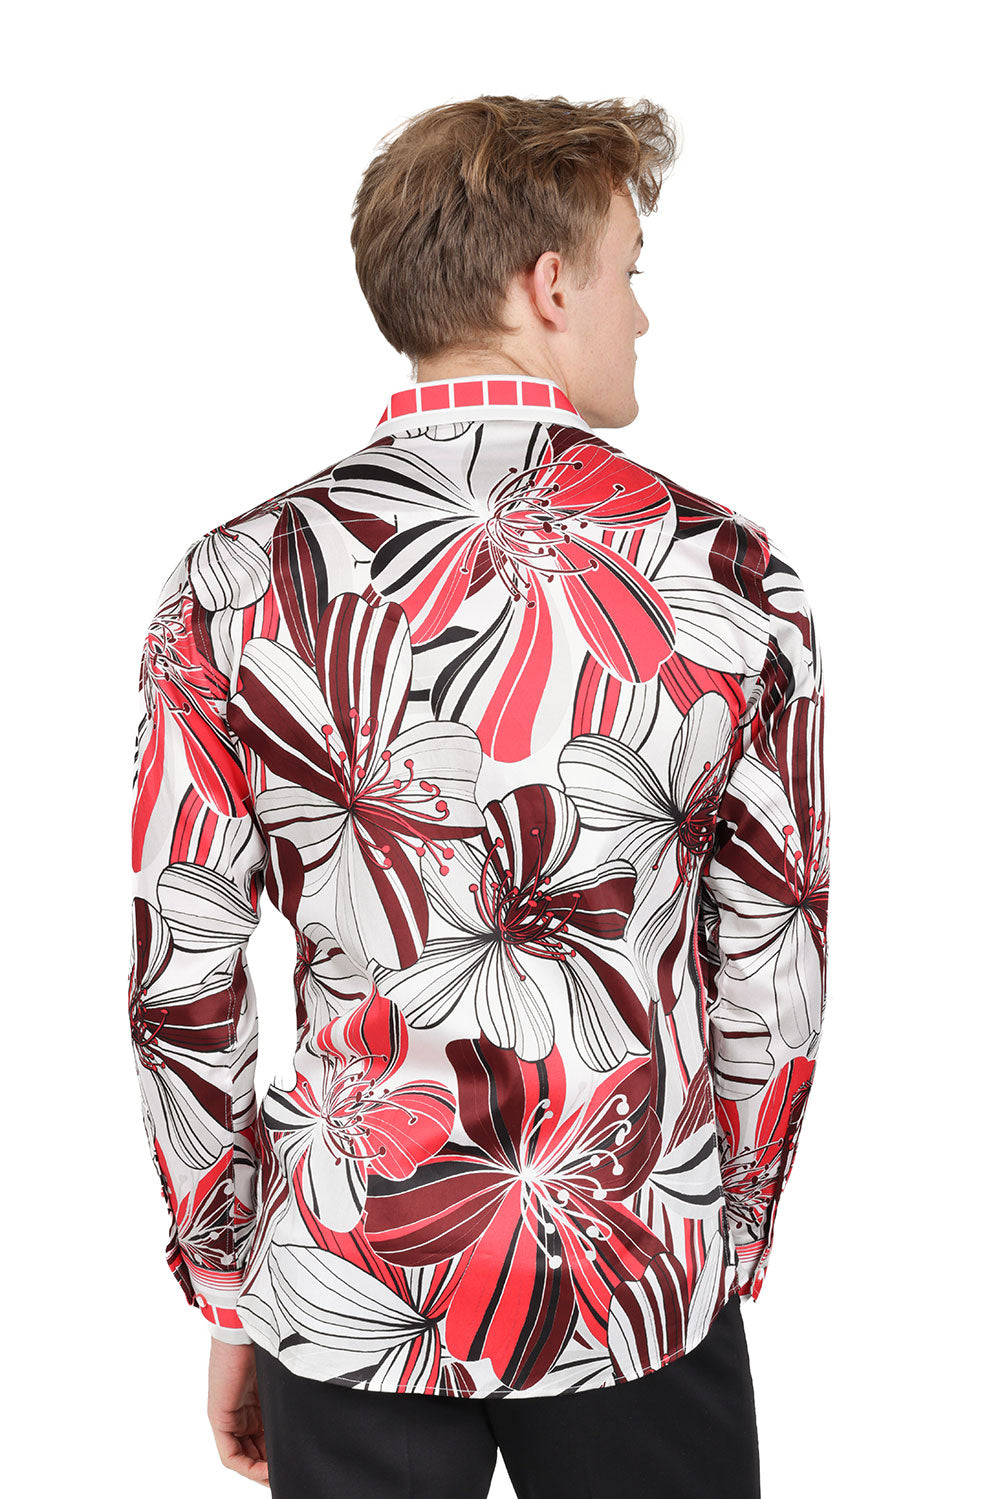 BARABAS Men's Vibrant Floral Print Button Down Long Sleeves Shirt SP08 Red